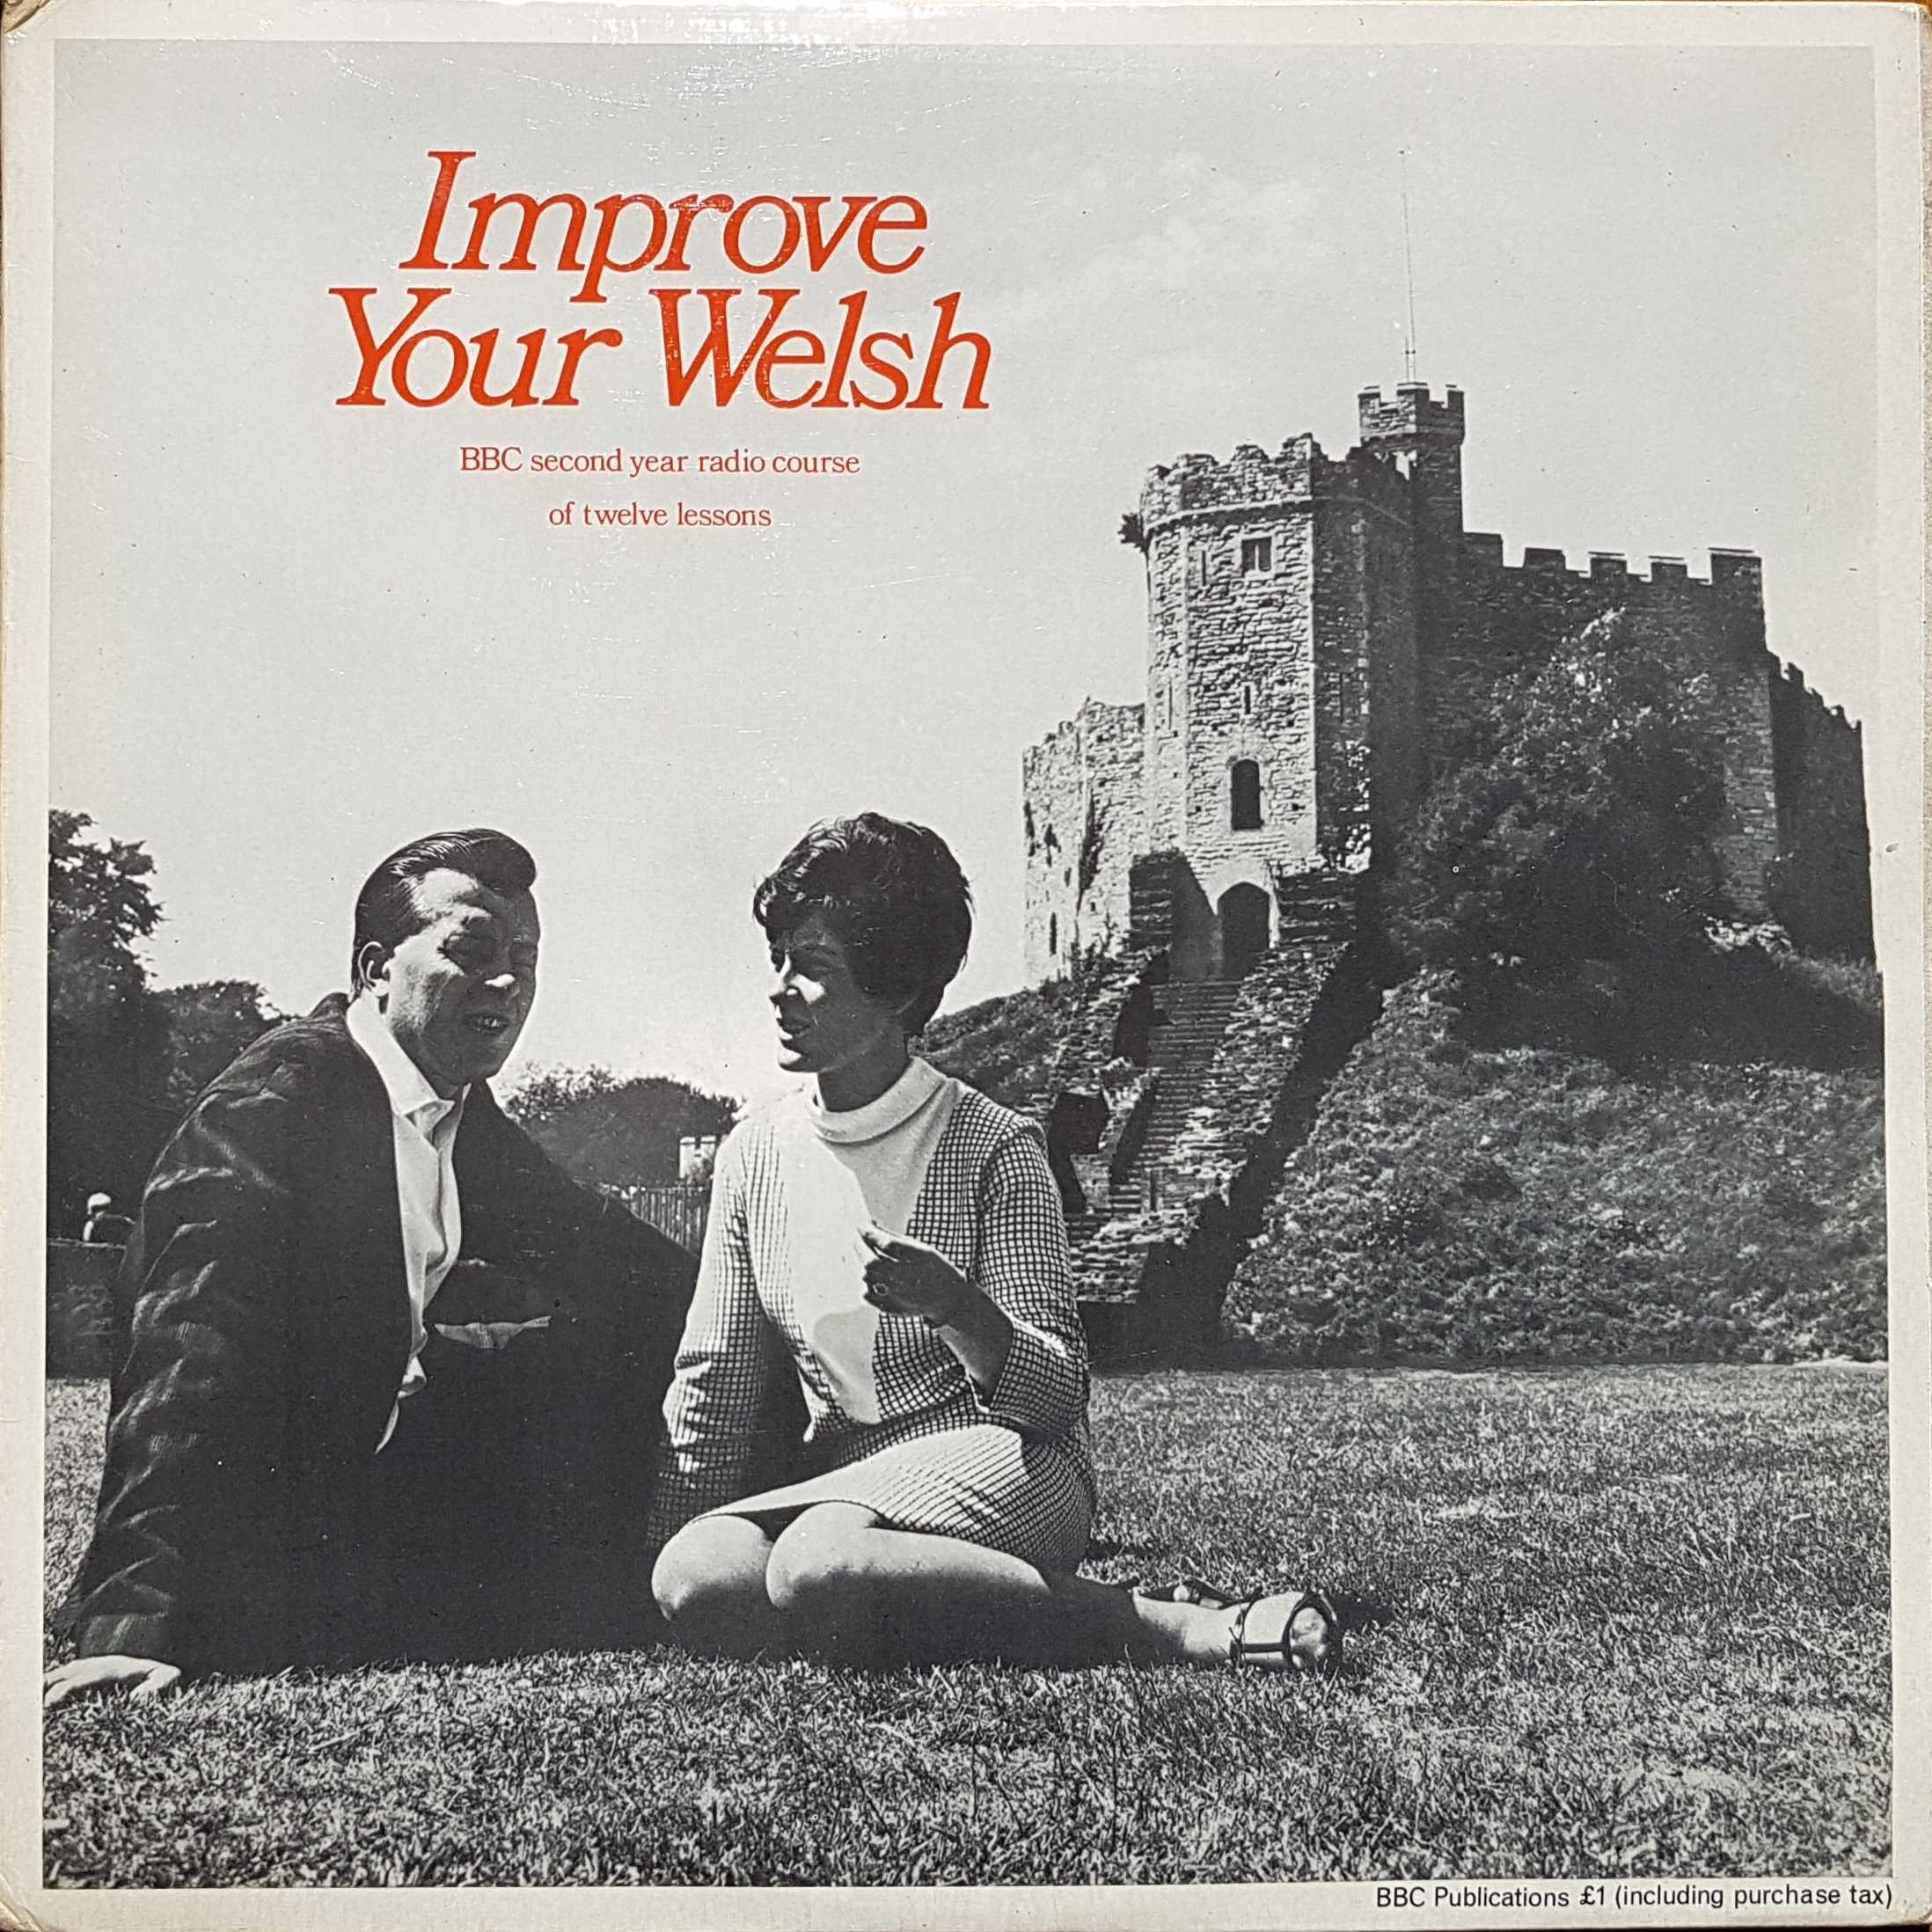 Picture of OP 119/120 Improve your Welsh - BBC second year radio course of twelve lessons by artist Islwyn Ffowc Elis from the BBC albums - Records and Tapes library